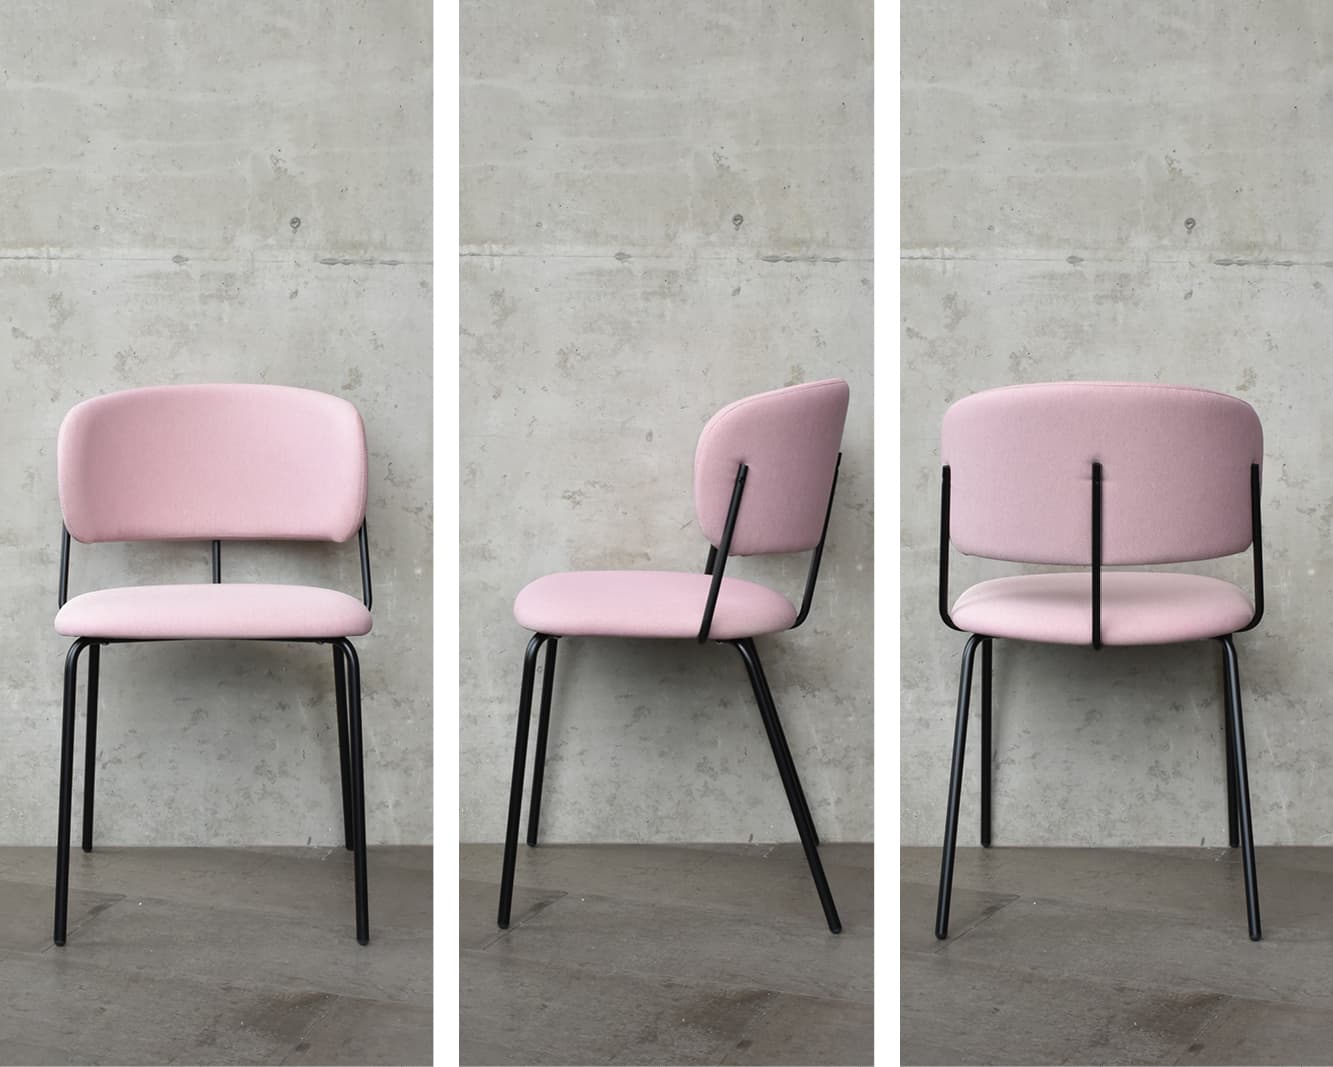 Musta side chair - New metal framed furniture as seen at the Salone del Mobile Milano April, 2019